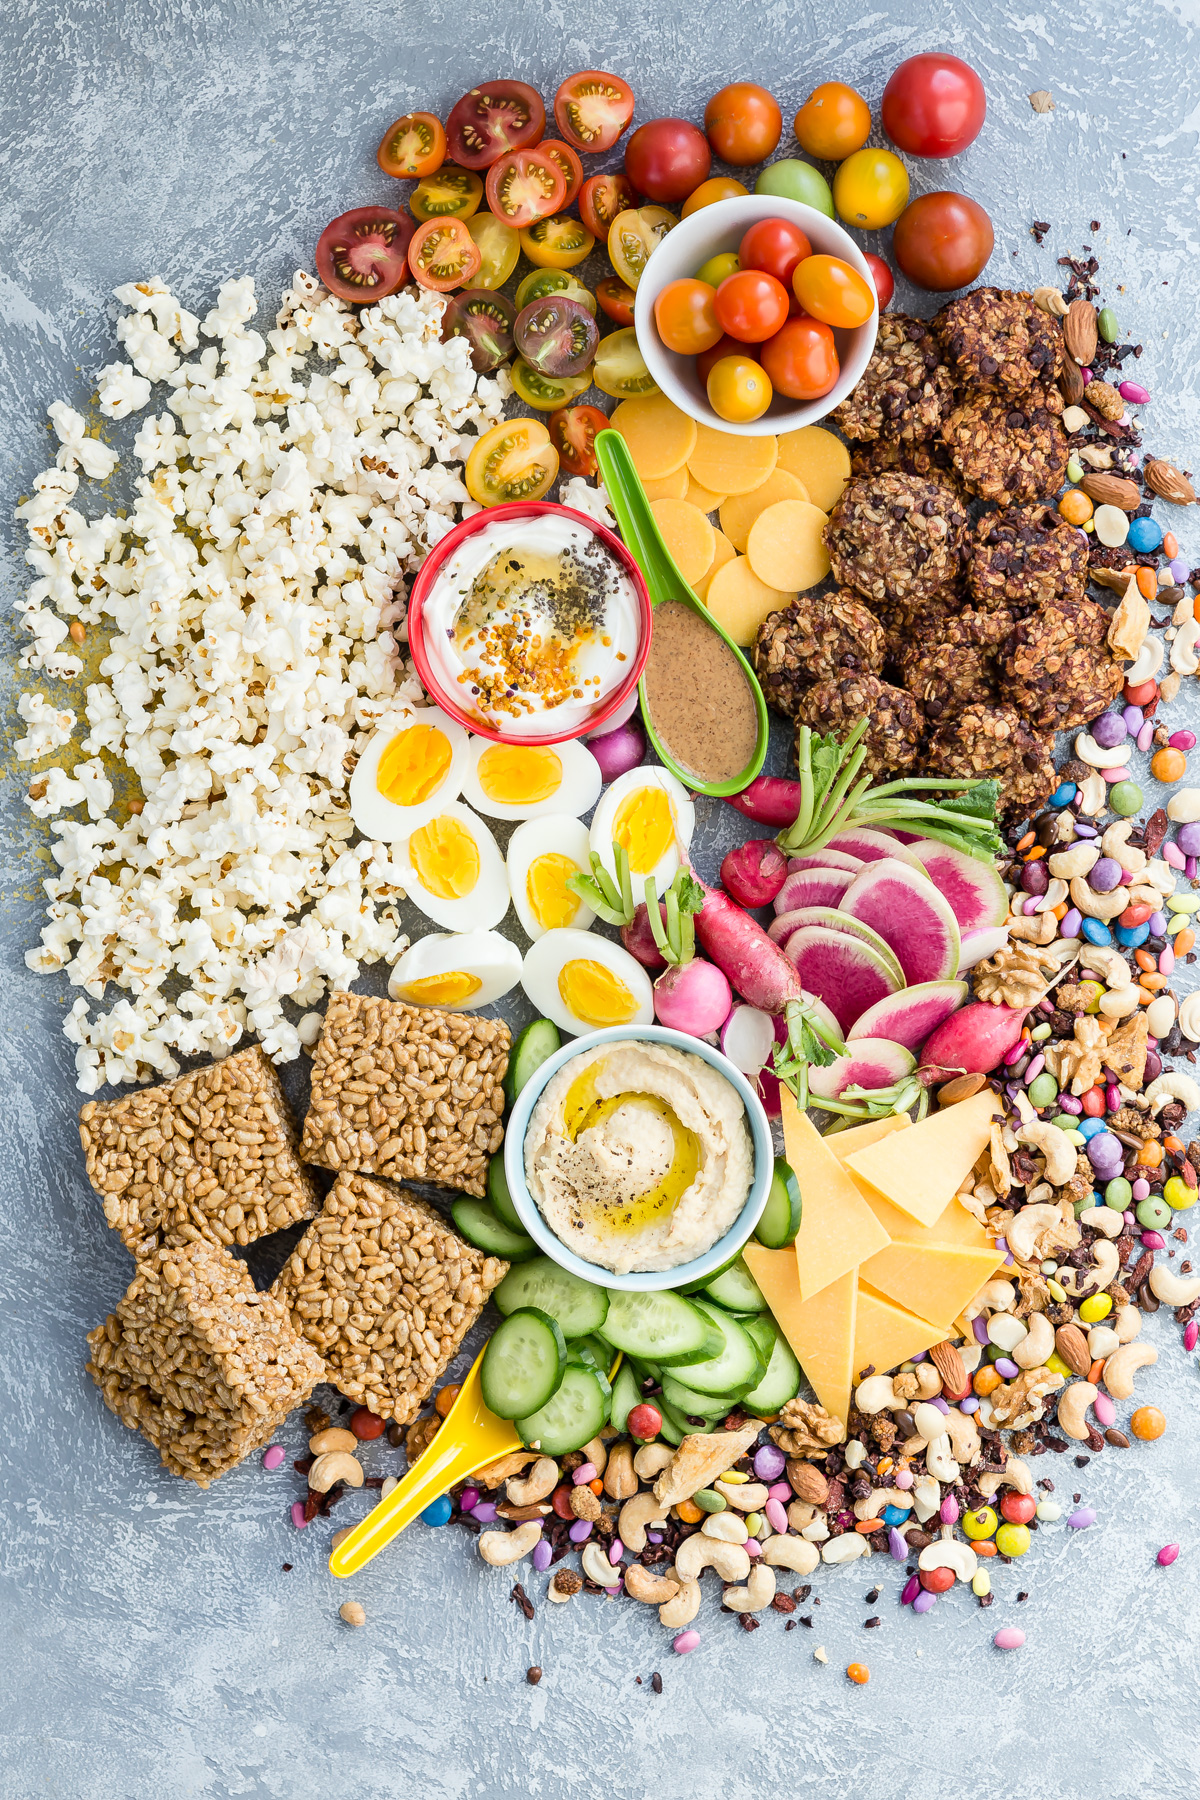 Healthy Snack Platter from Weelicious.com